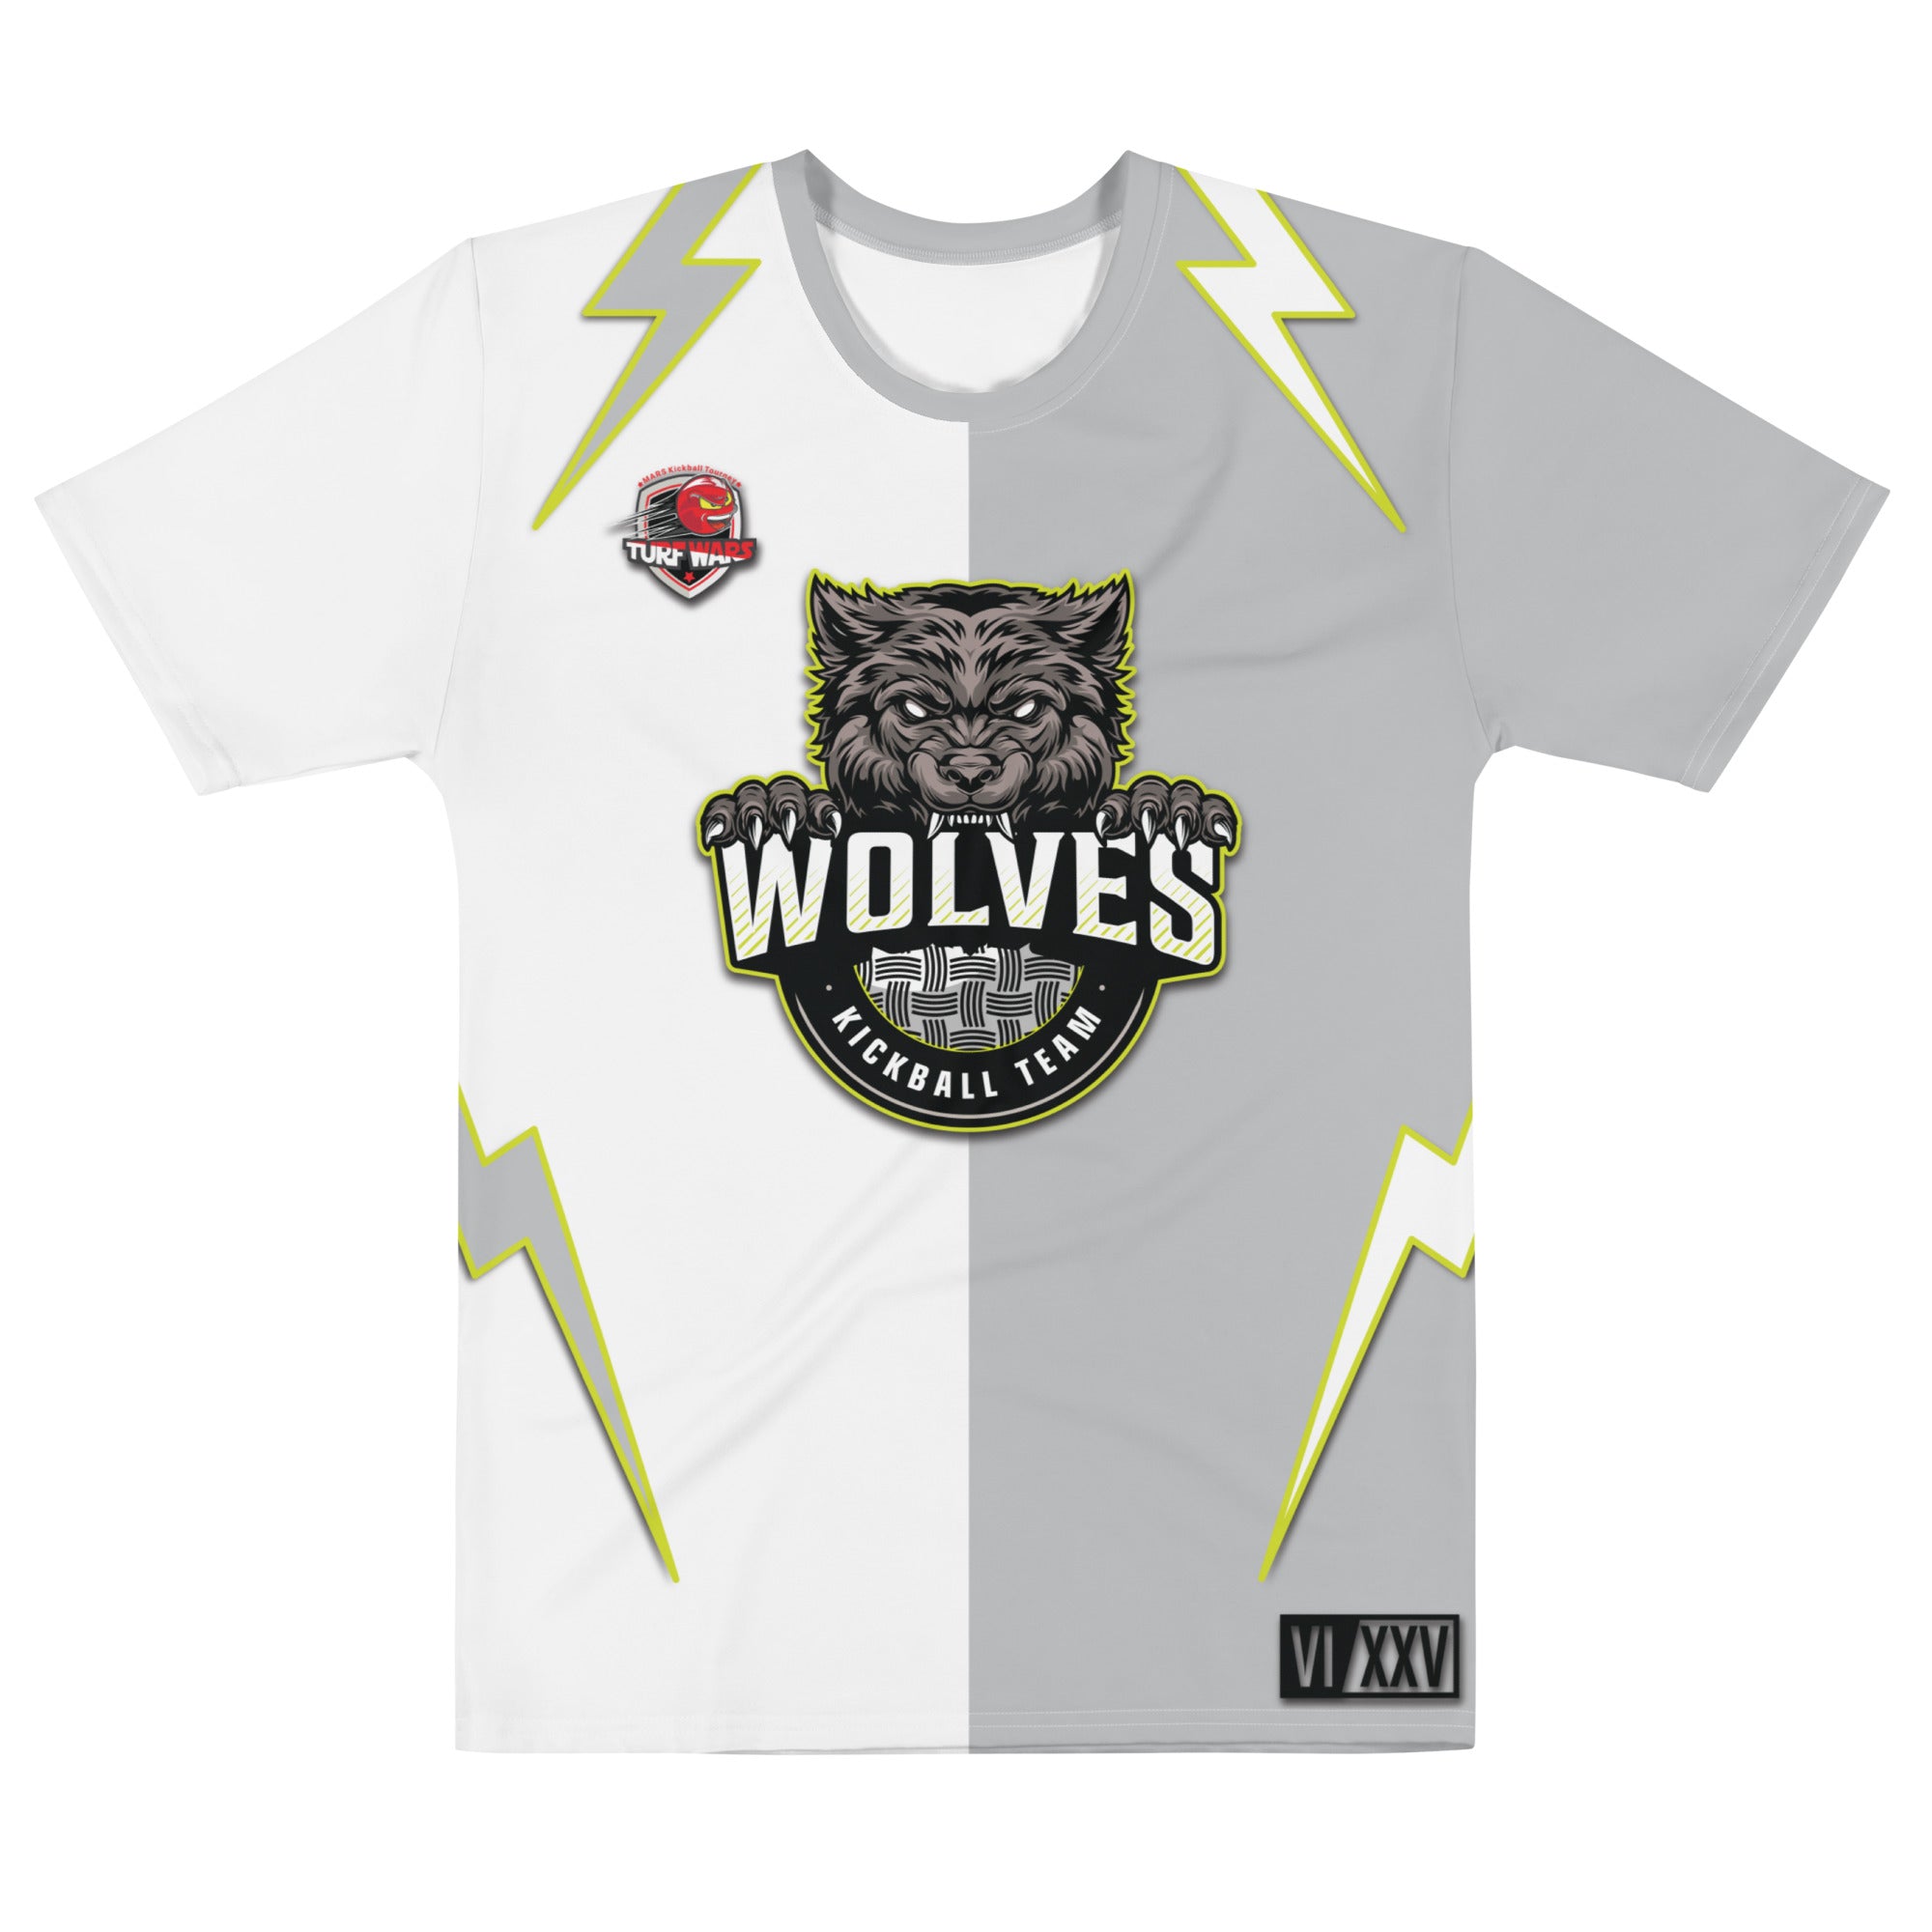 Wolves sublimated rugby jersey design - Stud Rugby